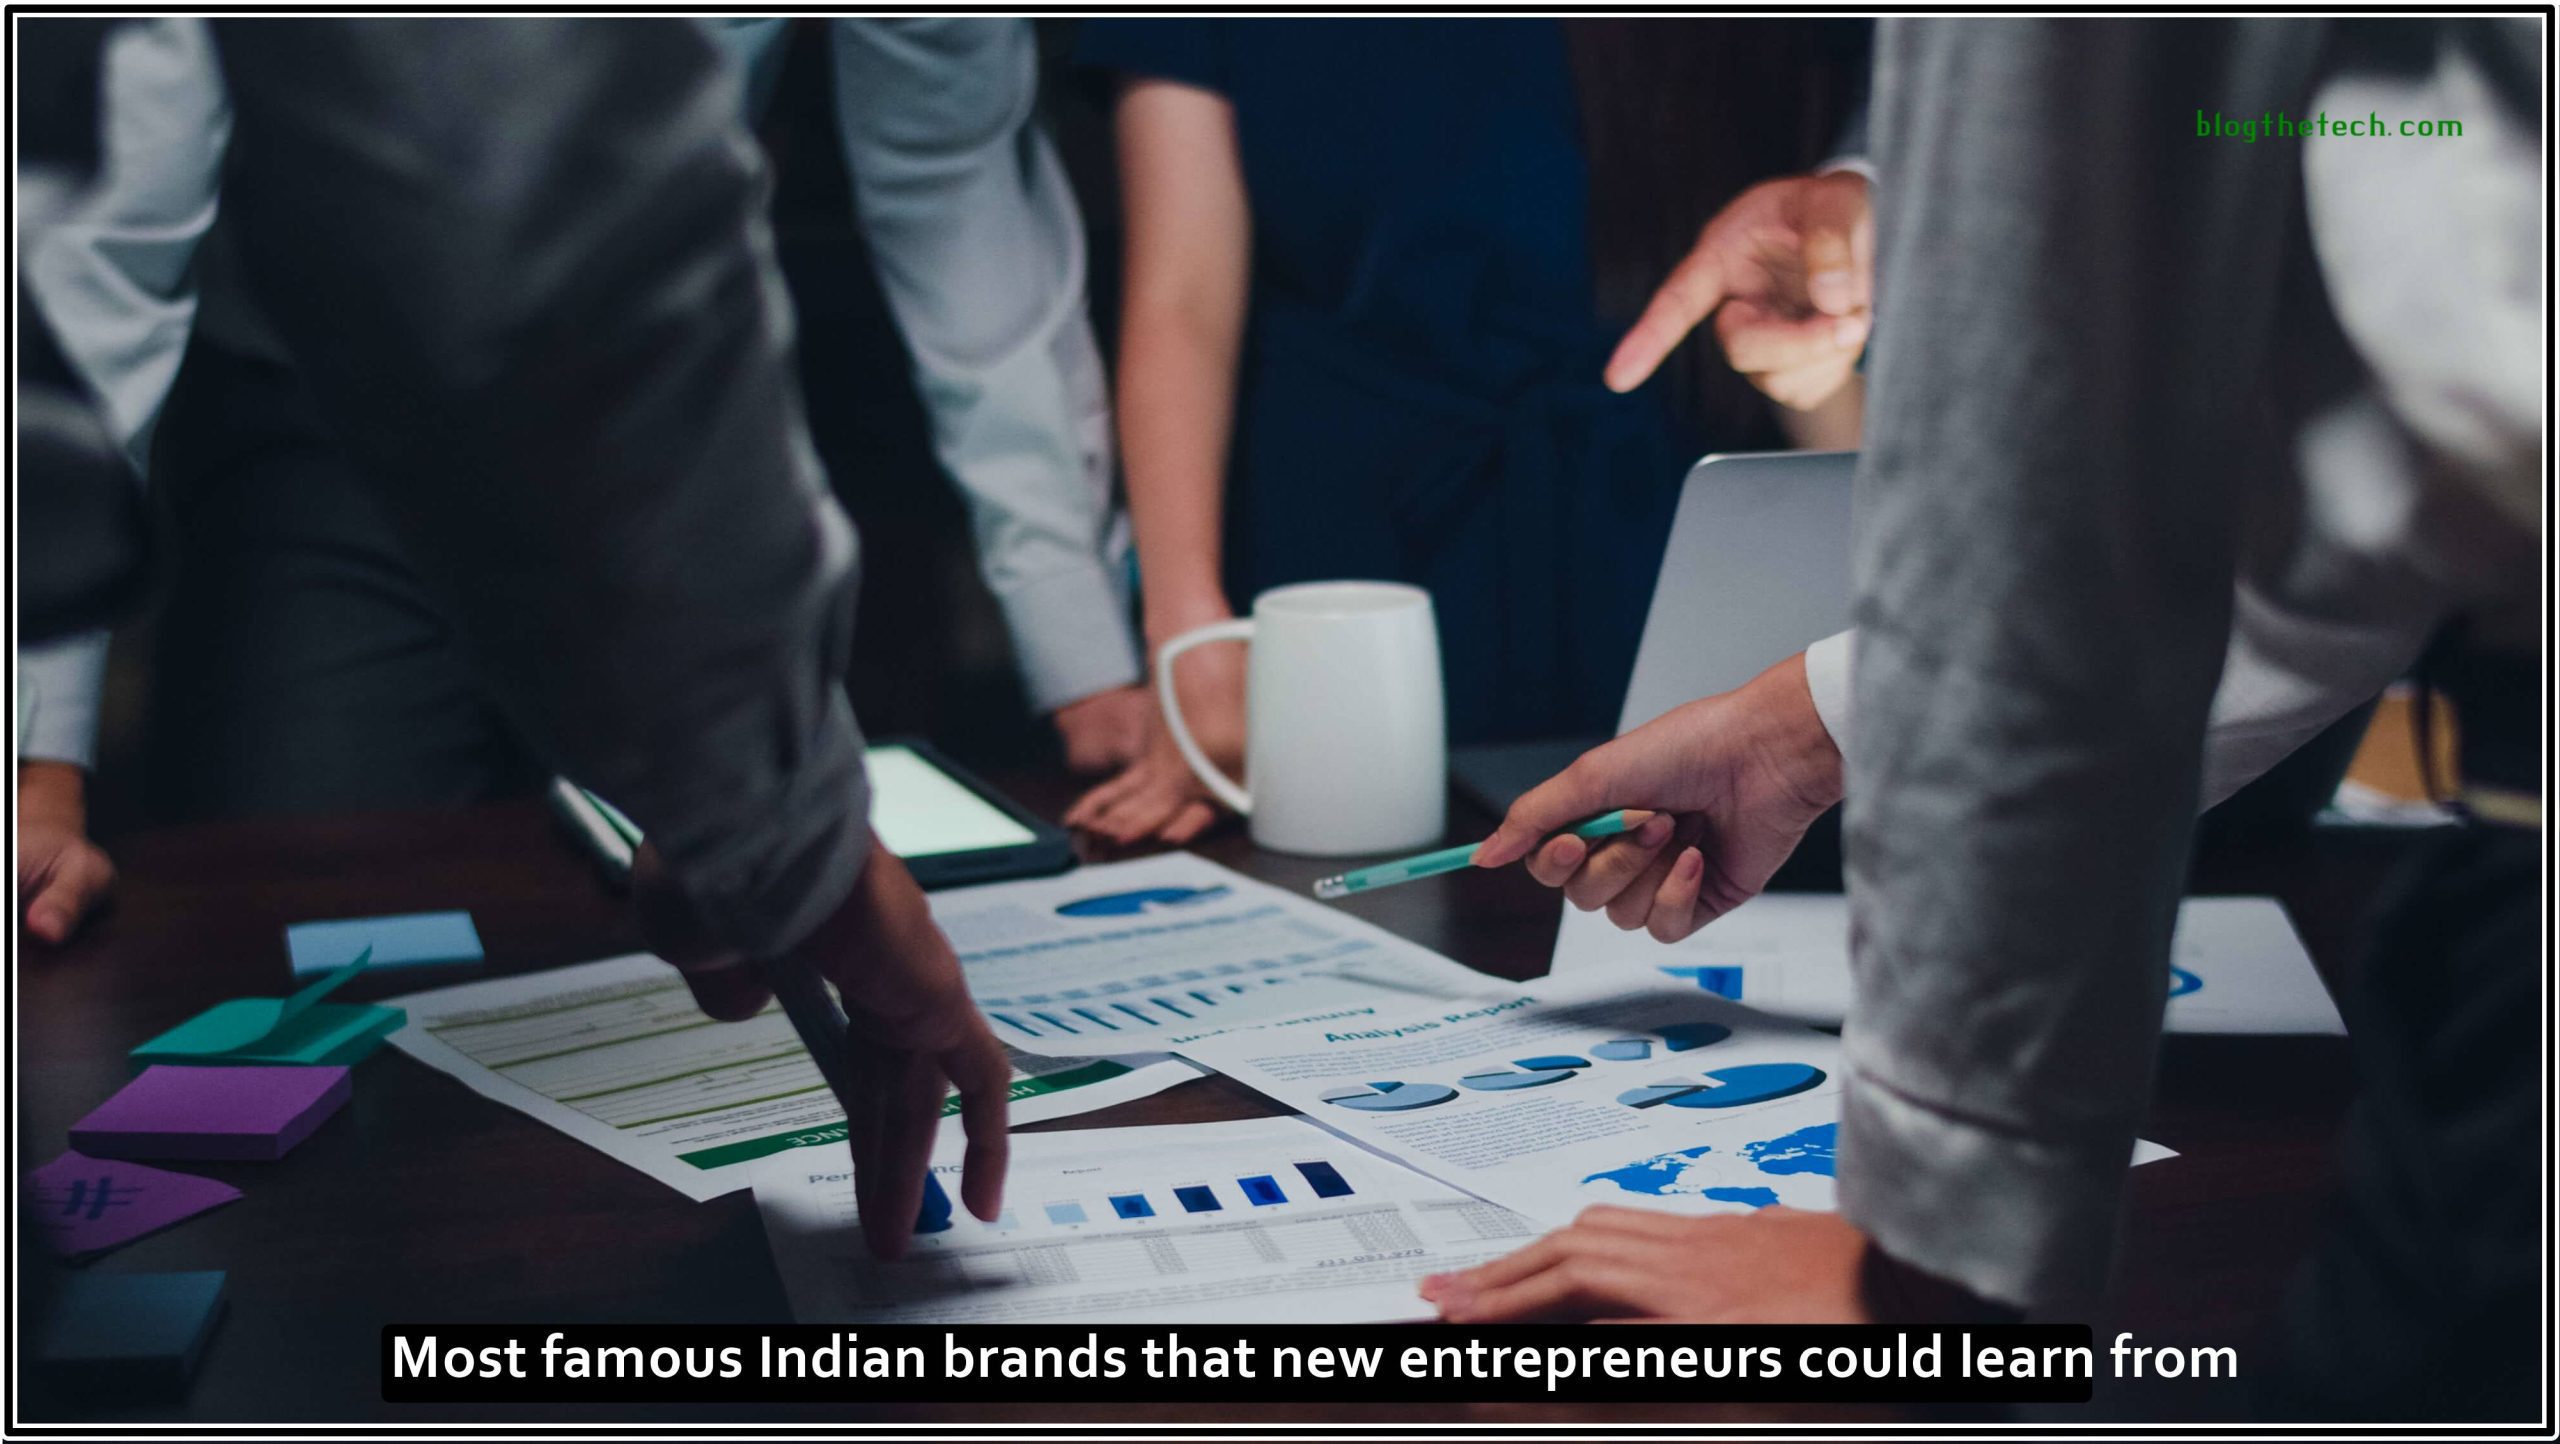 Most famous Indian brands that new entrepreneurs could learn from